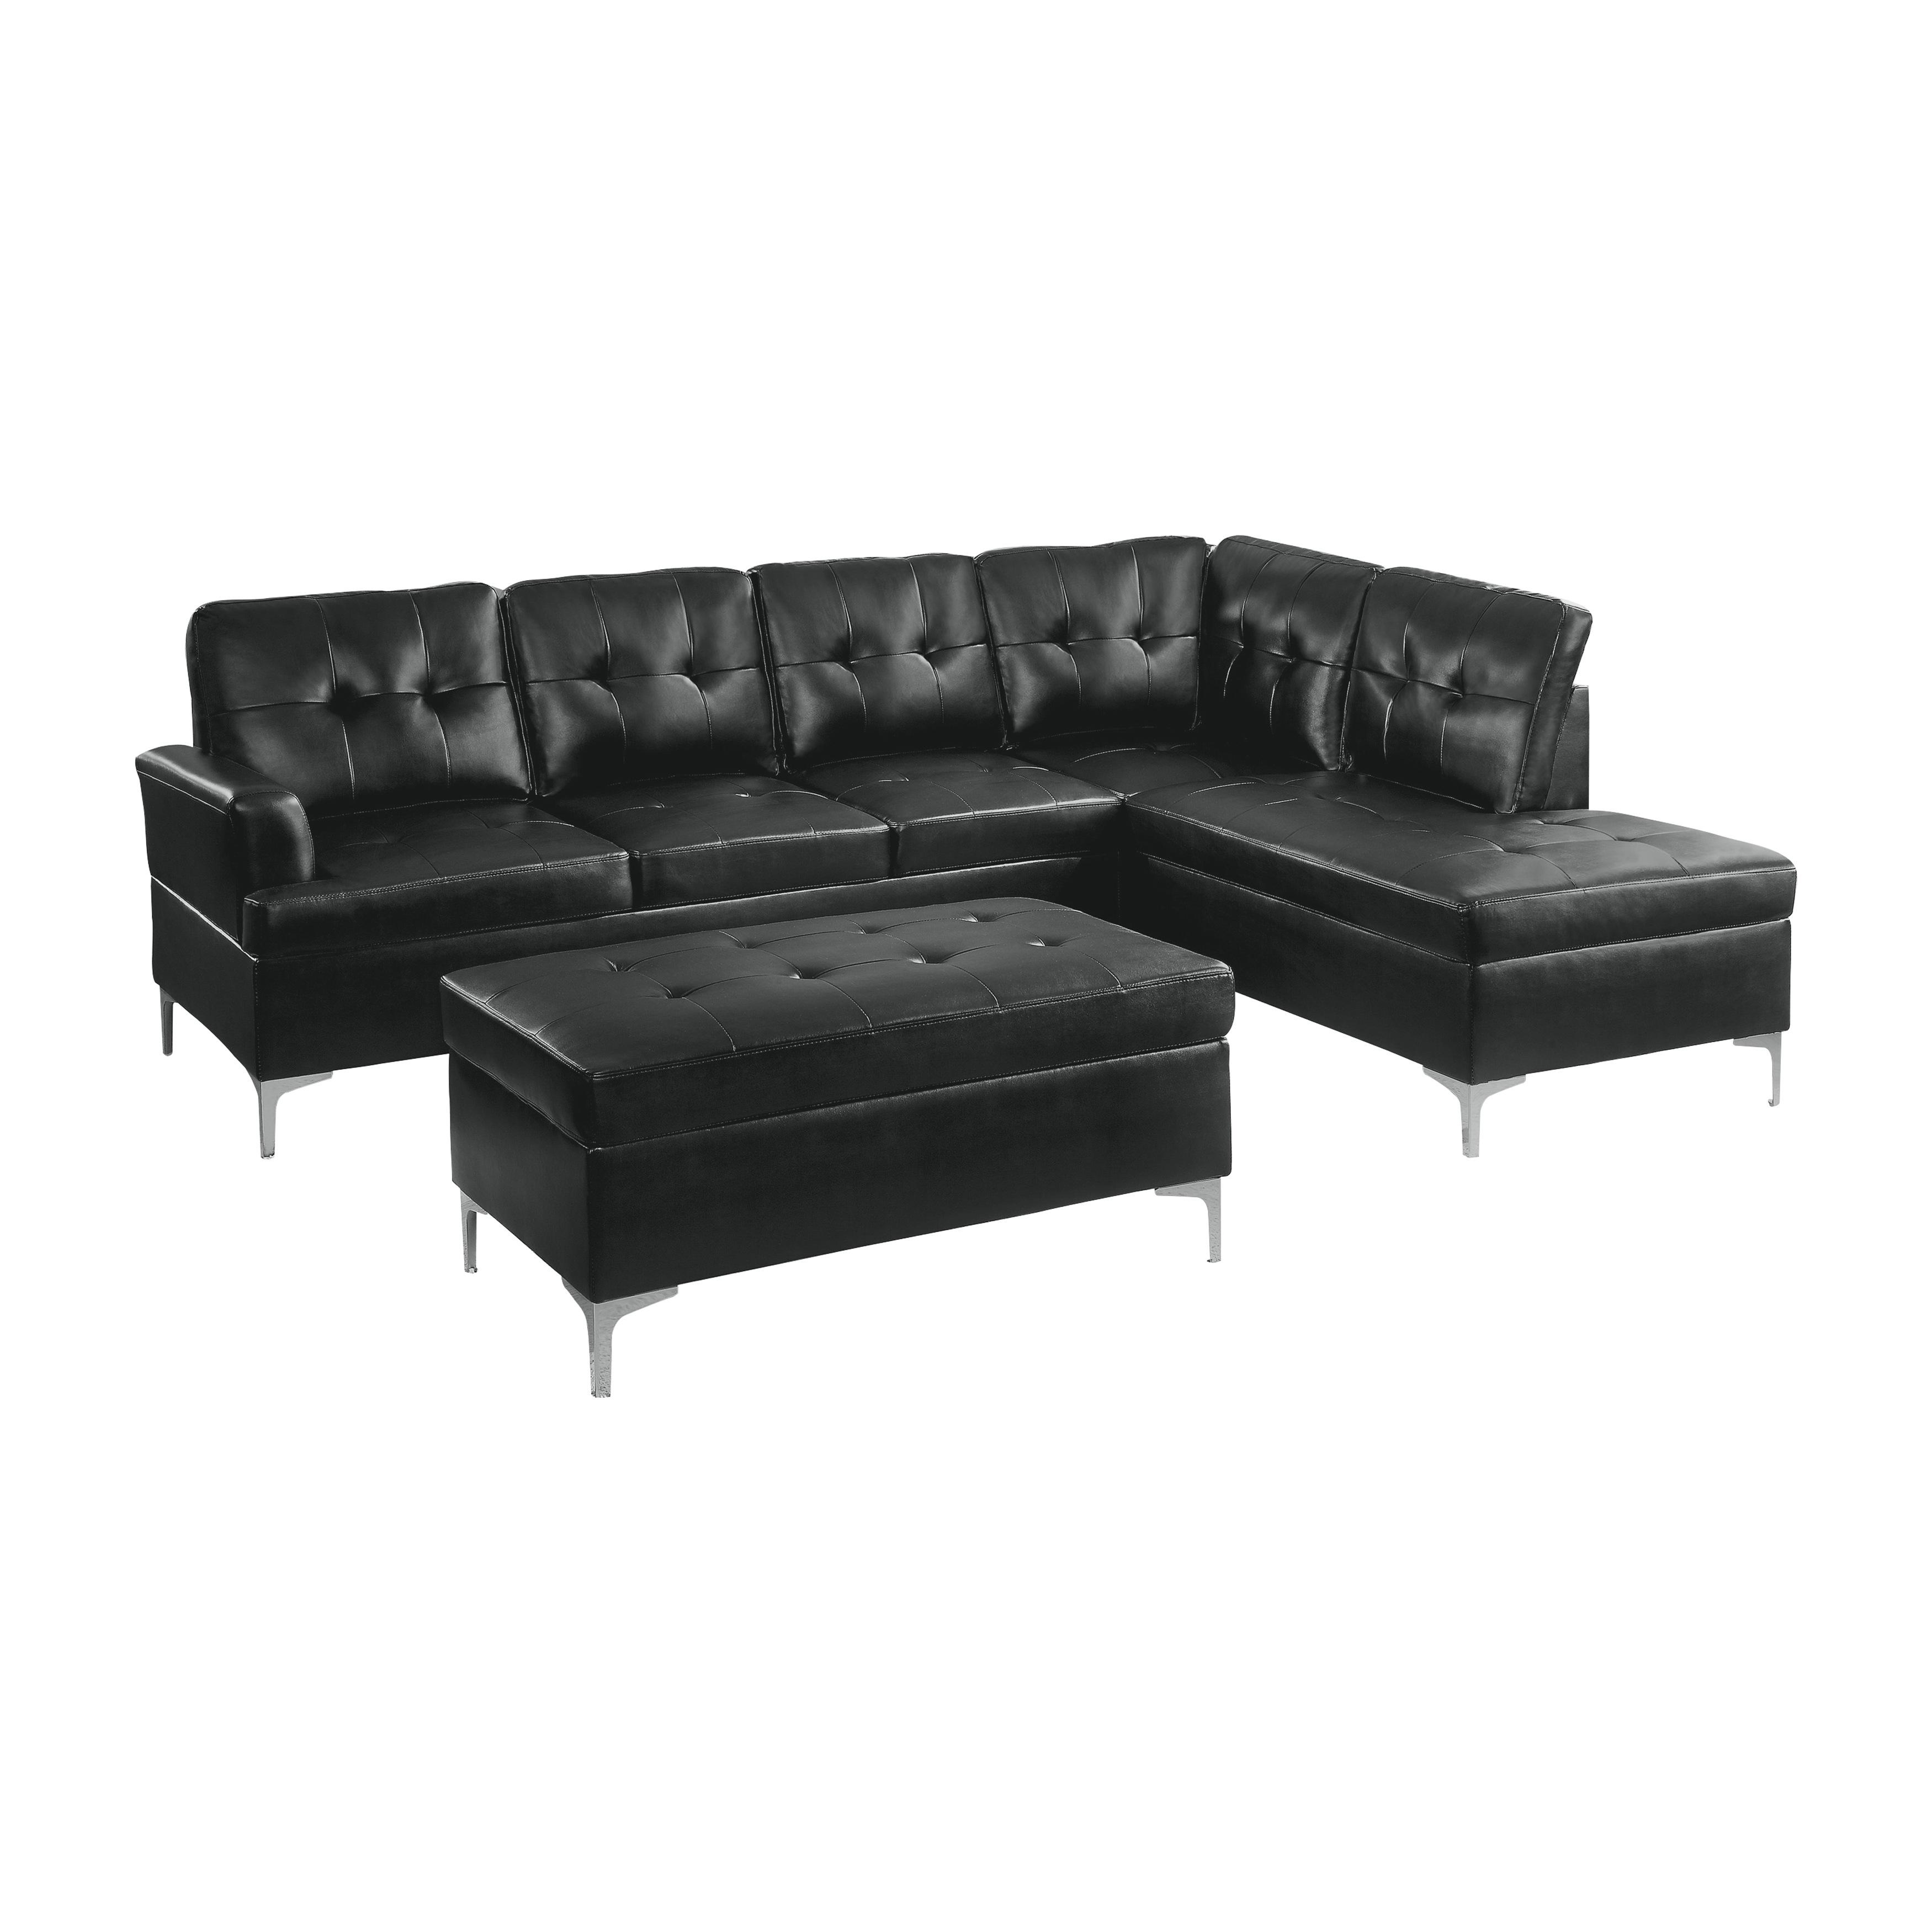 Contemporary Sectional w/ Ottoman 8378BLK*3 Barrington 8378BLK*3 in Black Faux Leather